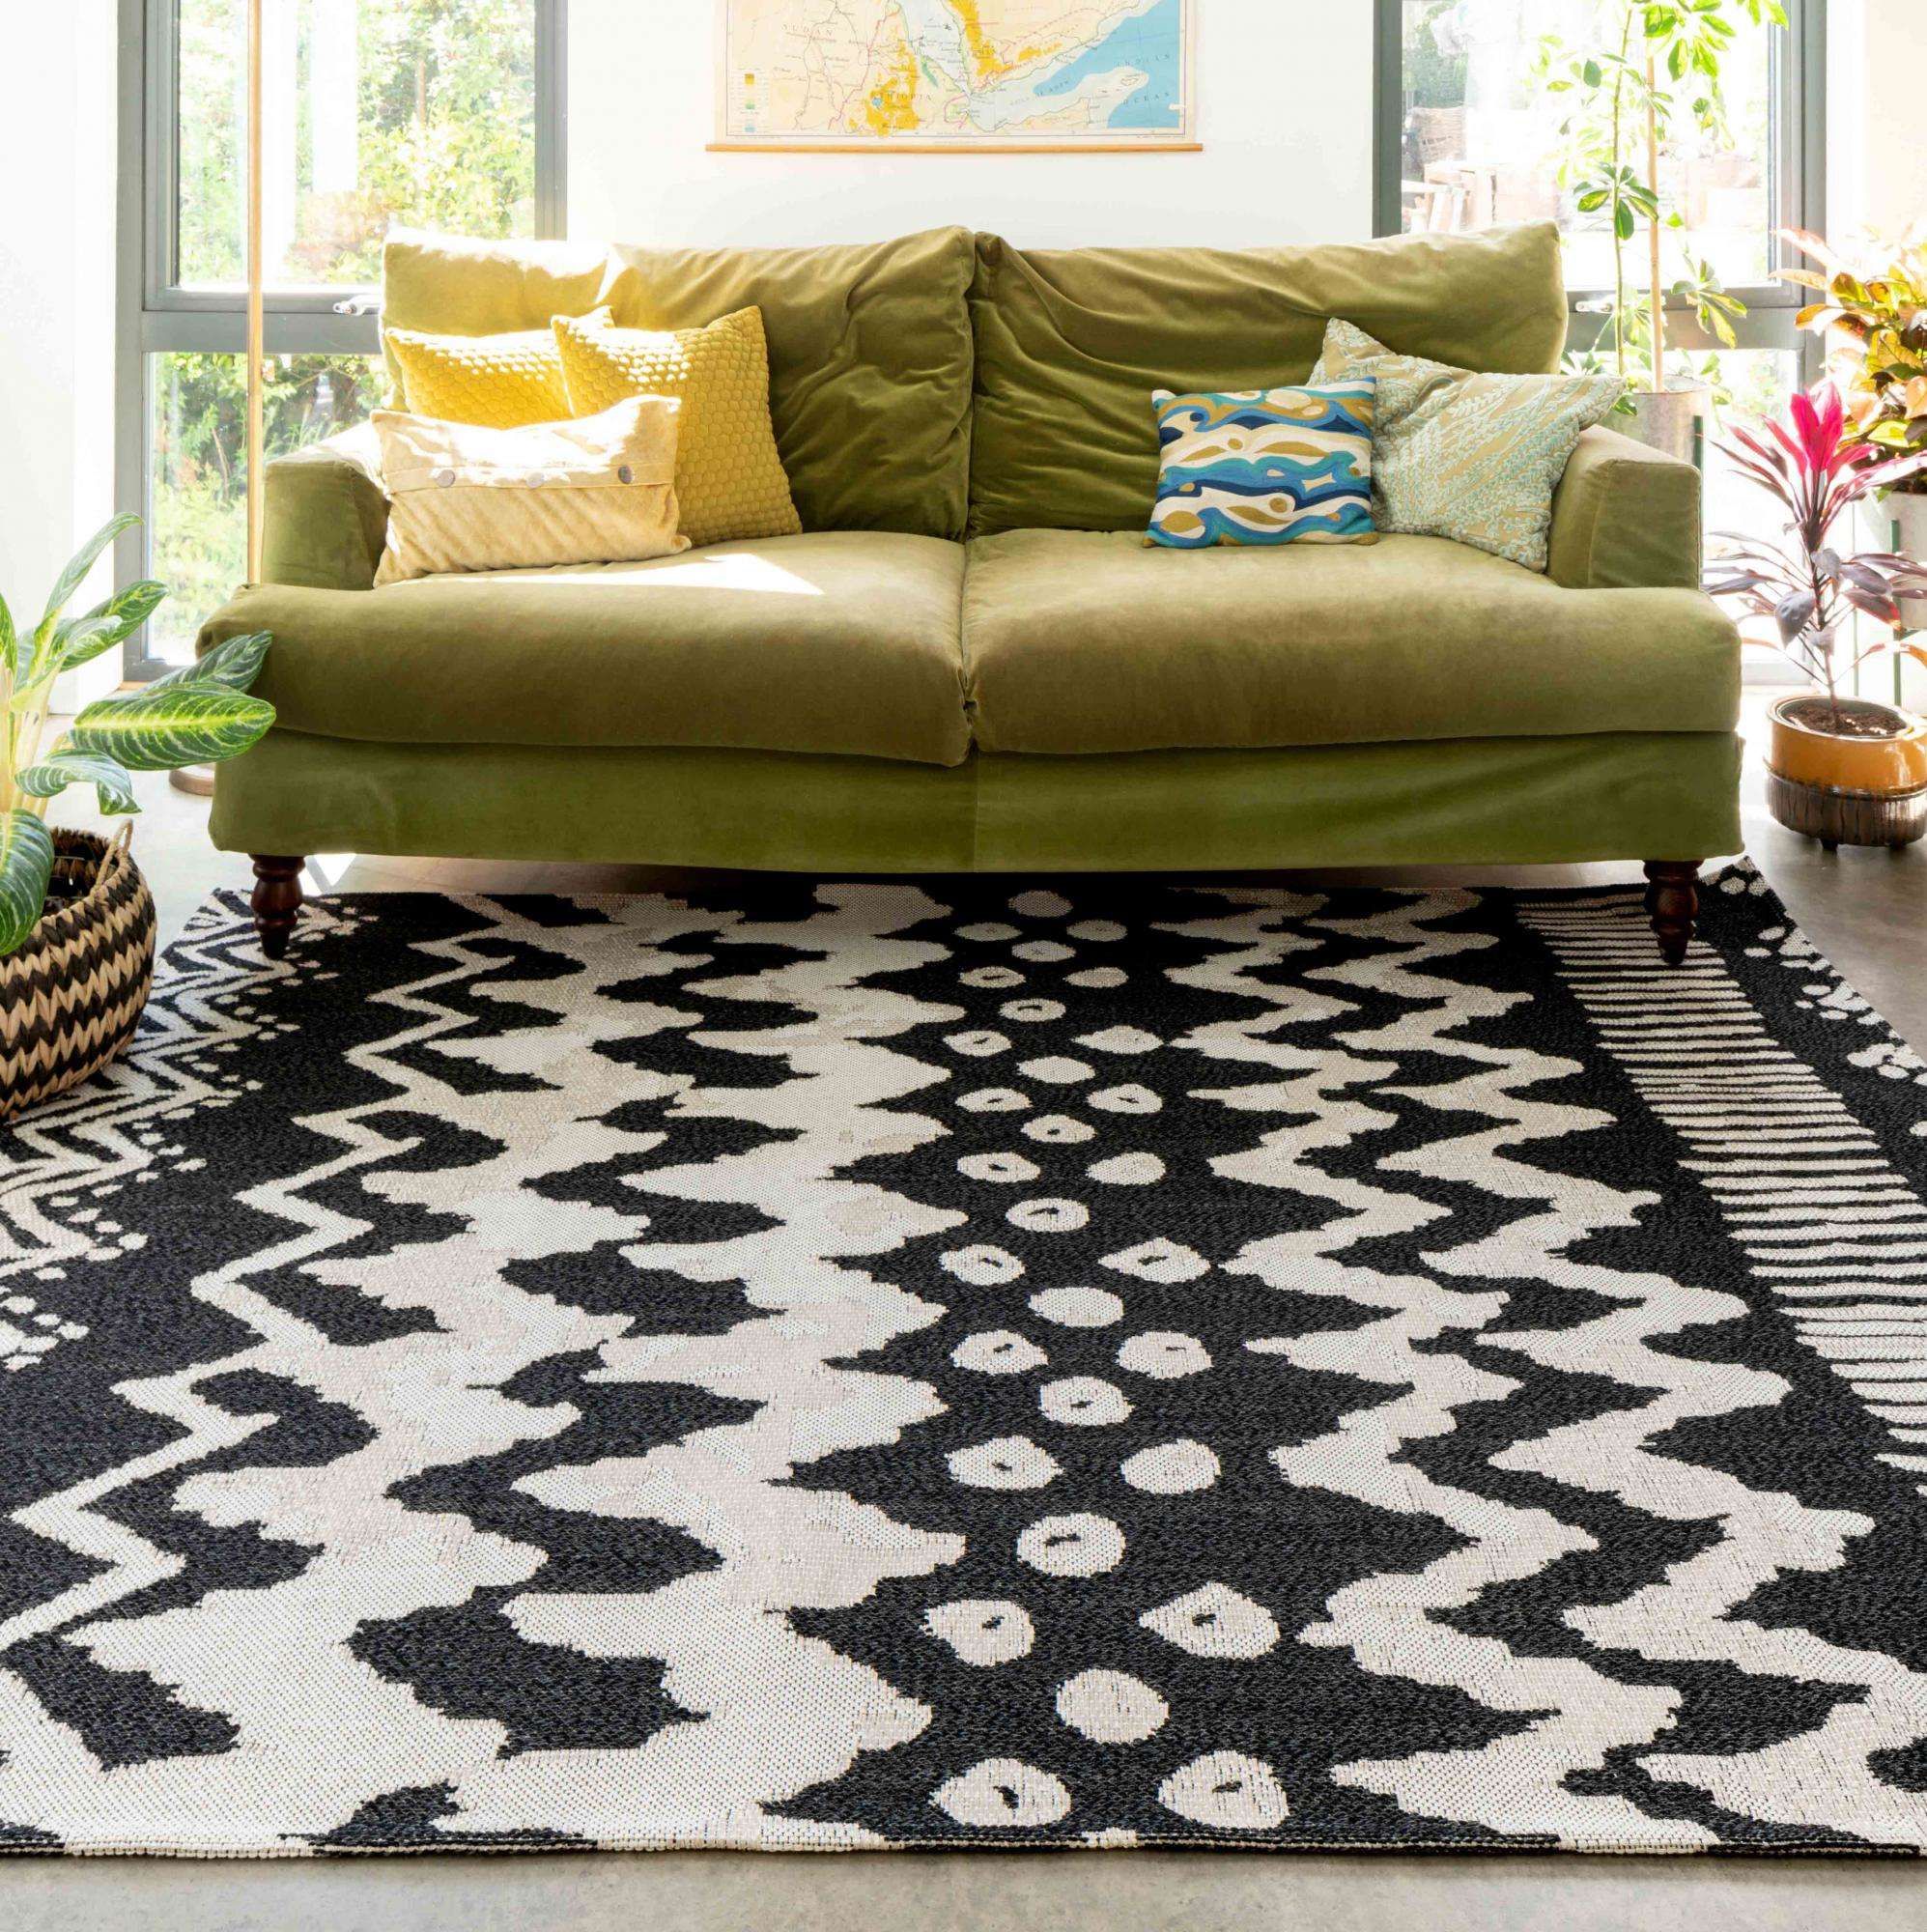 Rustic Chic Black White Woven Sustainable Recycled Cotton Rug | Kendall |  Kukoon Rugs Online With Regard To Black And White Rugs (View 8 of 15)